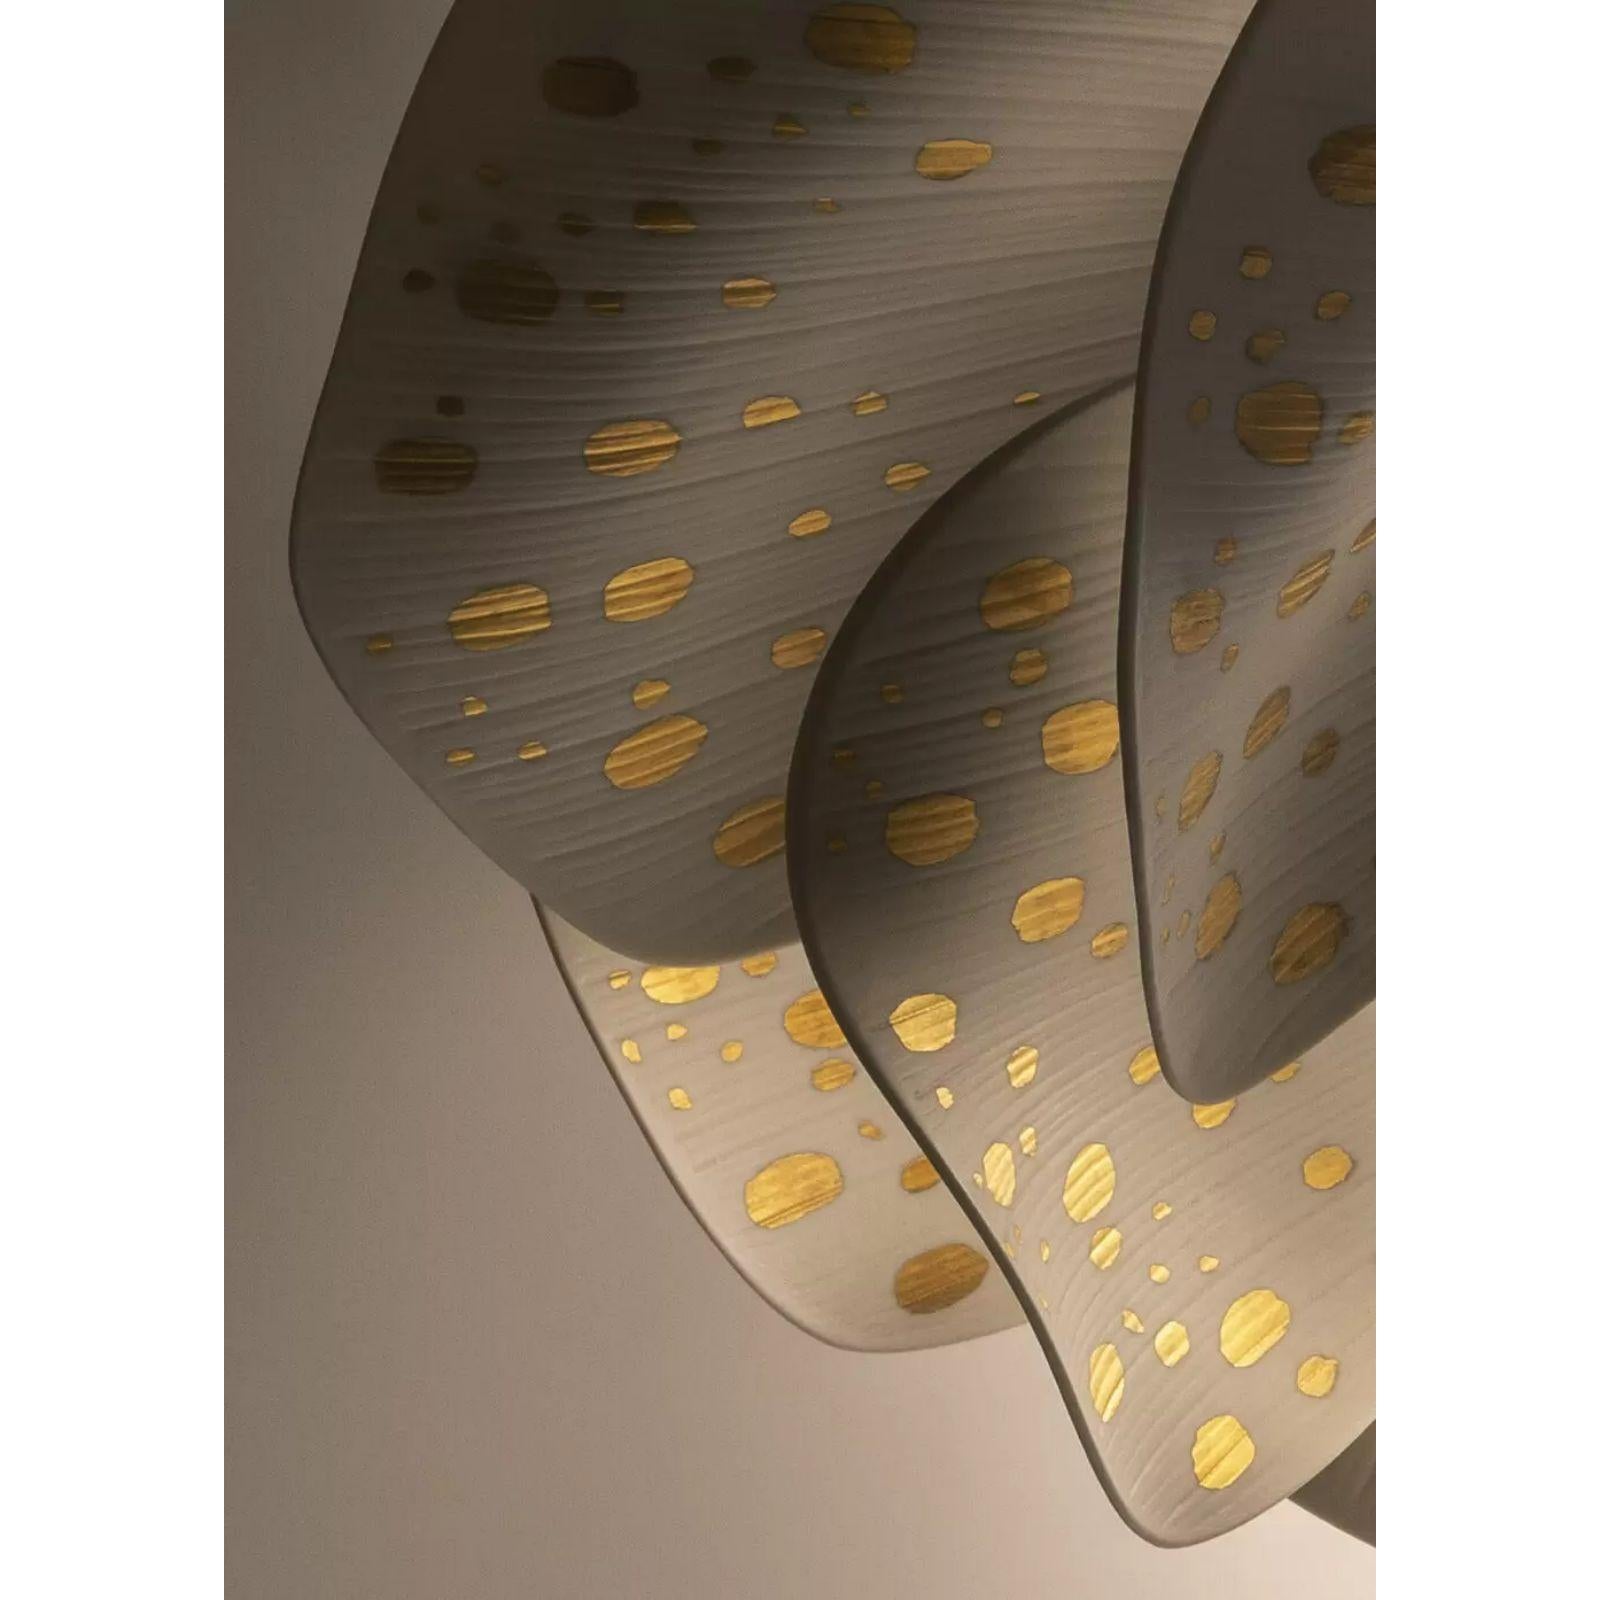 Porcelain wall lamp from the Nightbloom Collection, created by Lladró in collaboration with the Dutch designer Marcel Wanders. Delicate petals that seem to sway in the breeze inspire unique and innovative pieces.

The petals of the wall lamp are